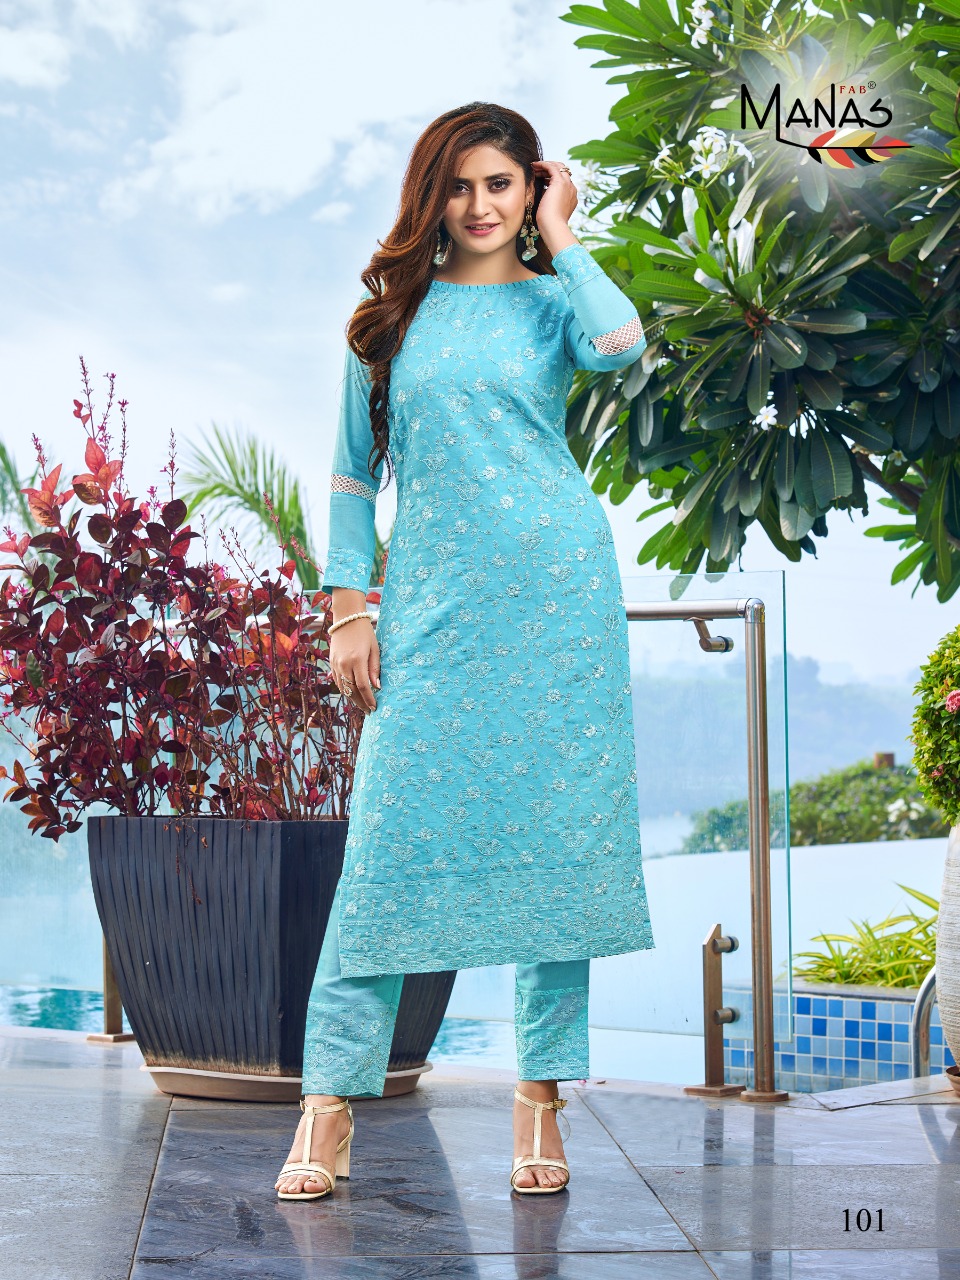 Manas Presents Lucknowi Embroidery Work Kurtis With Pants Collection At Wholesale